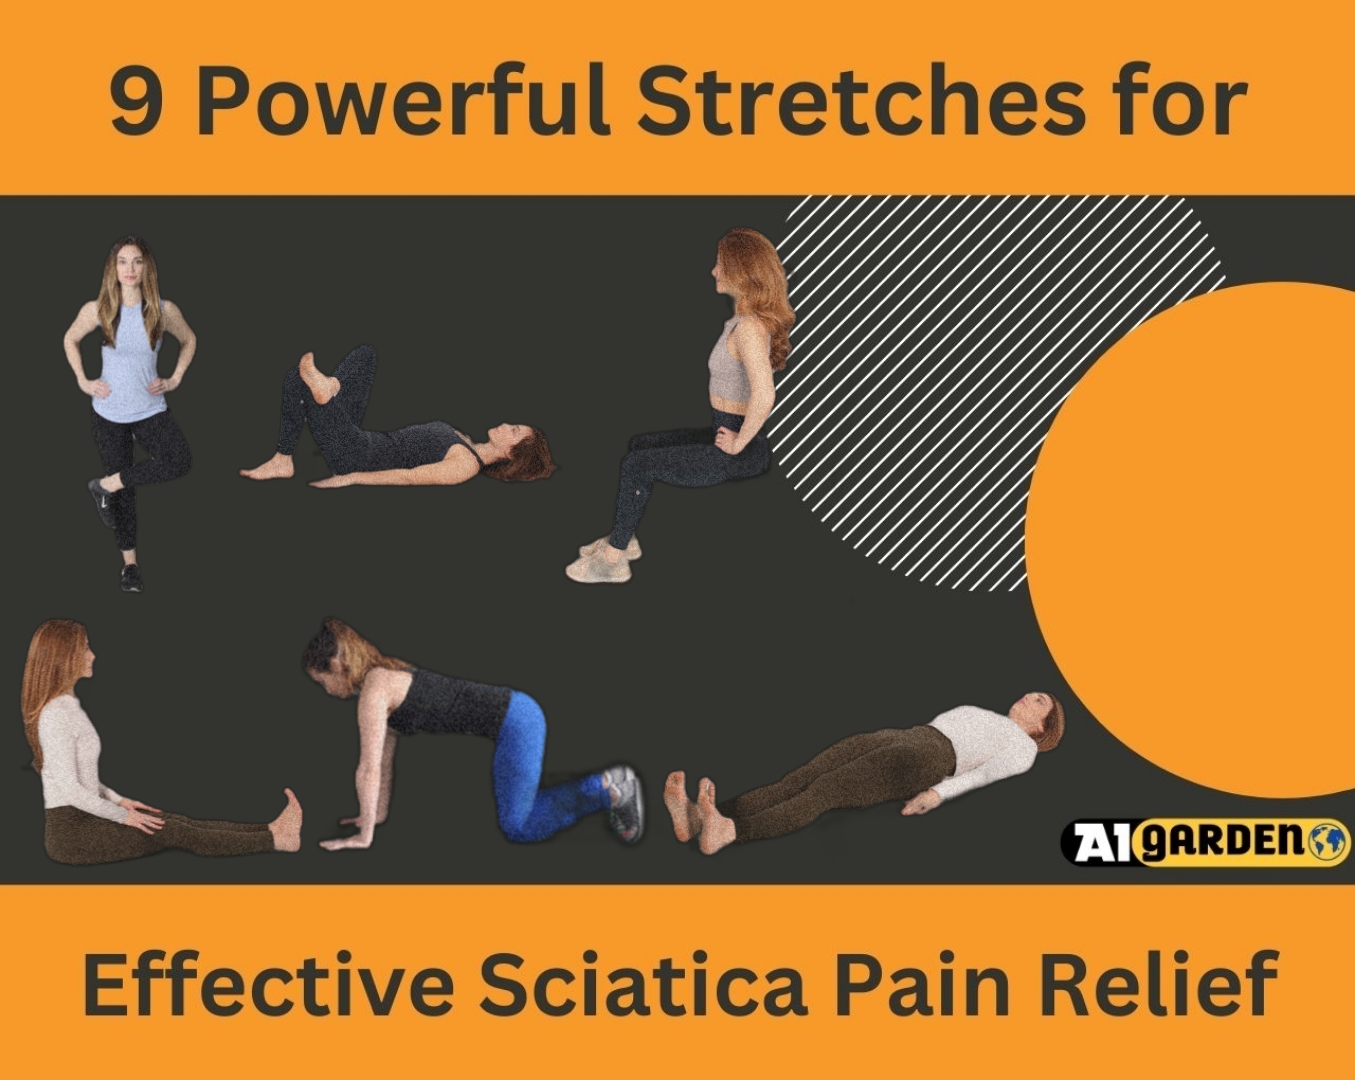 Sciatica Pain Can be Relieved with Simple Stretches